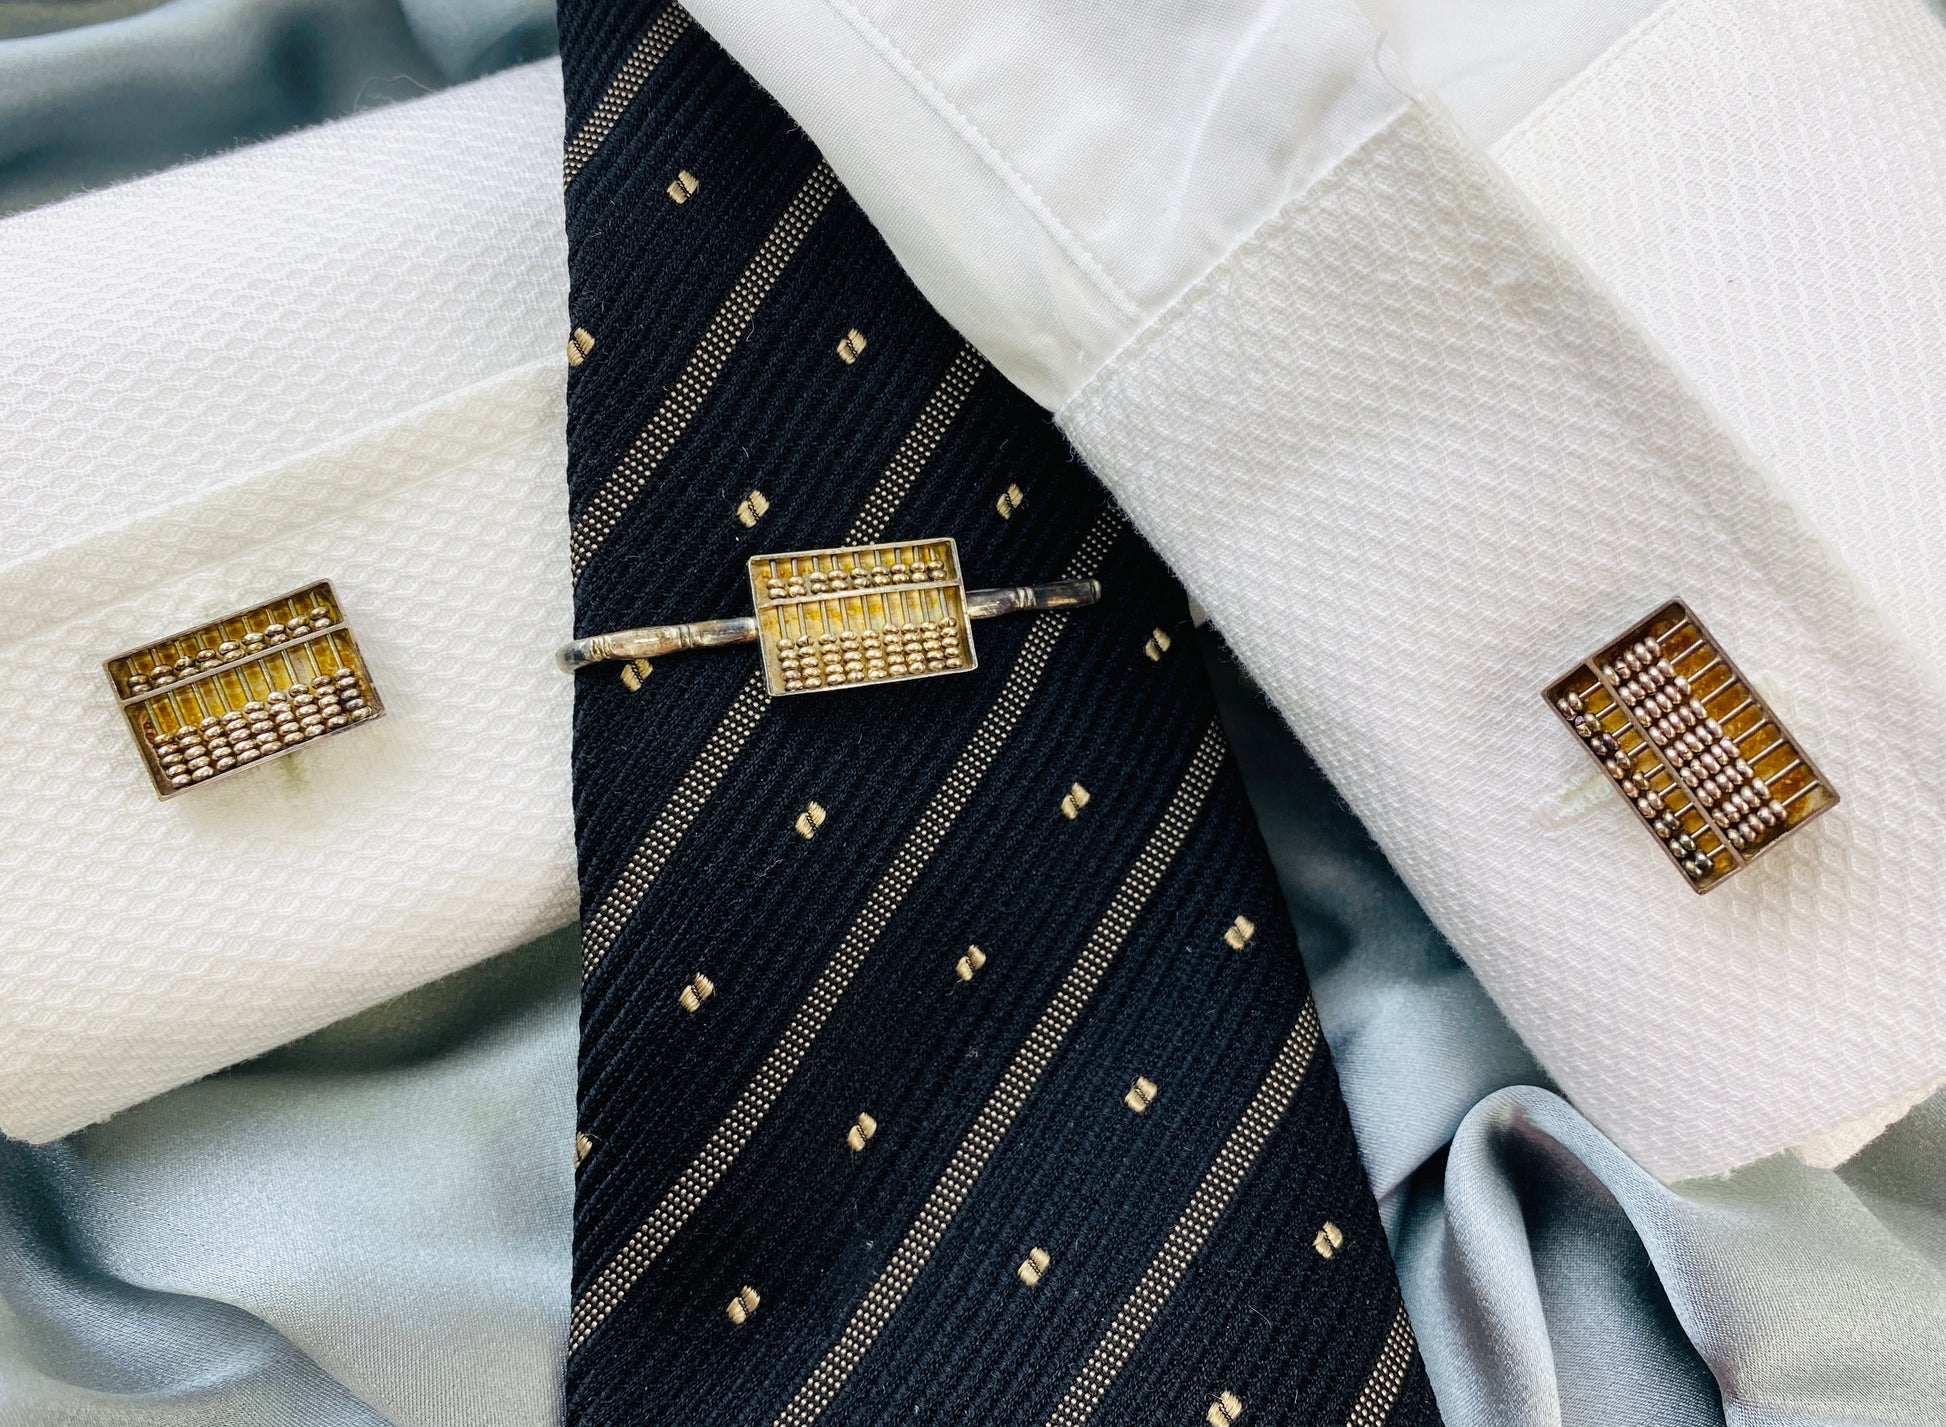 Vintage Working Abacus Silver Cufflinks and Tie Bar